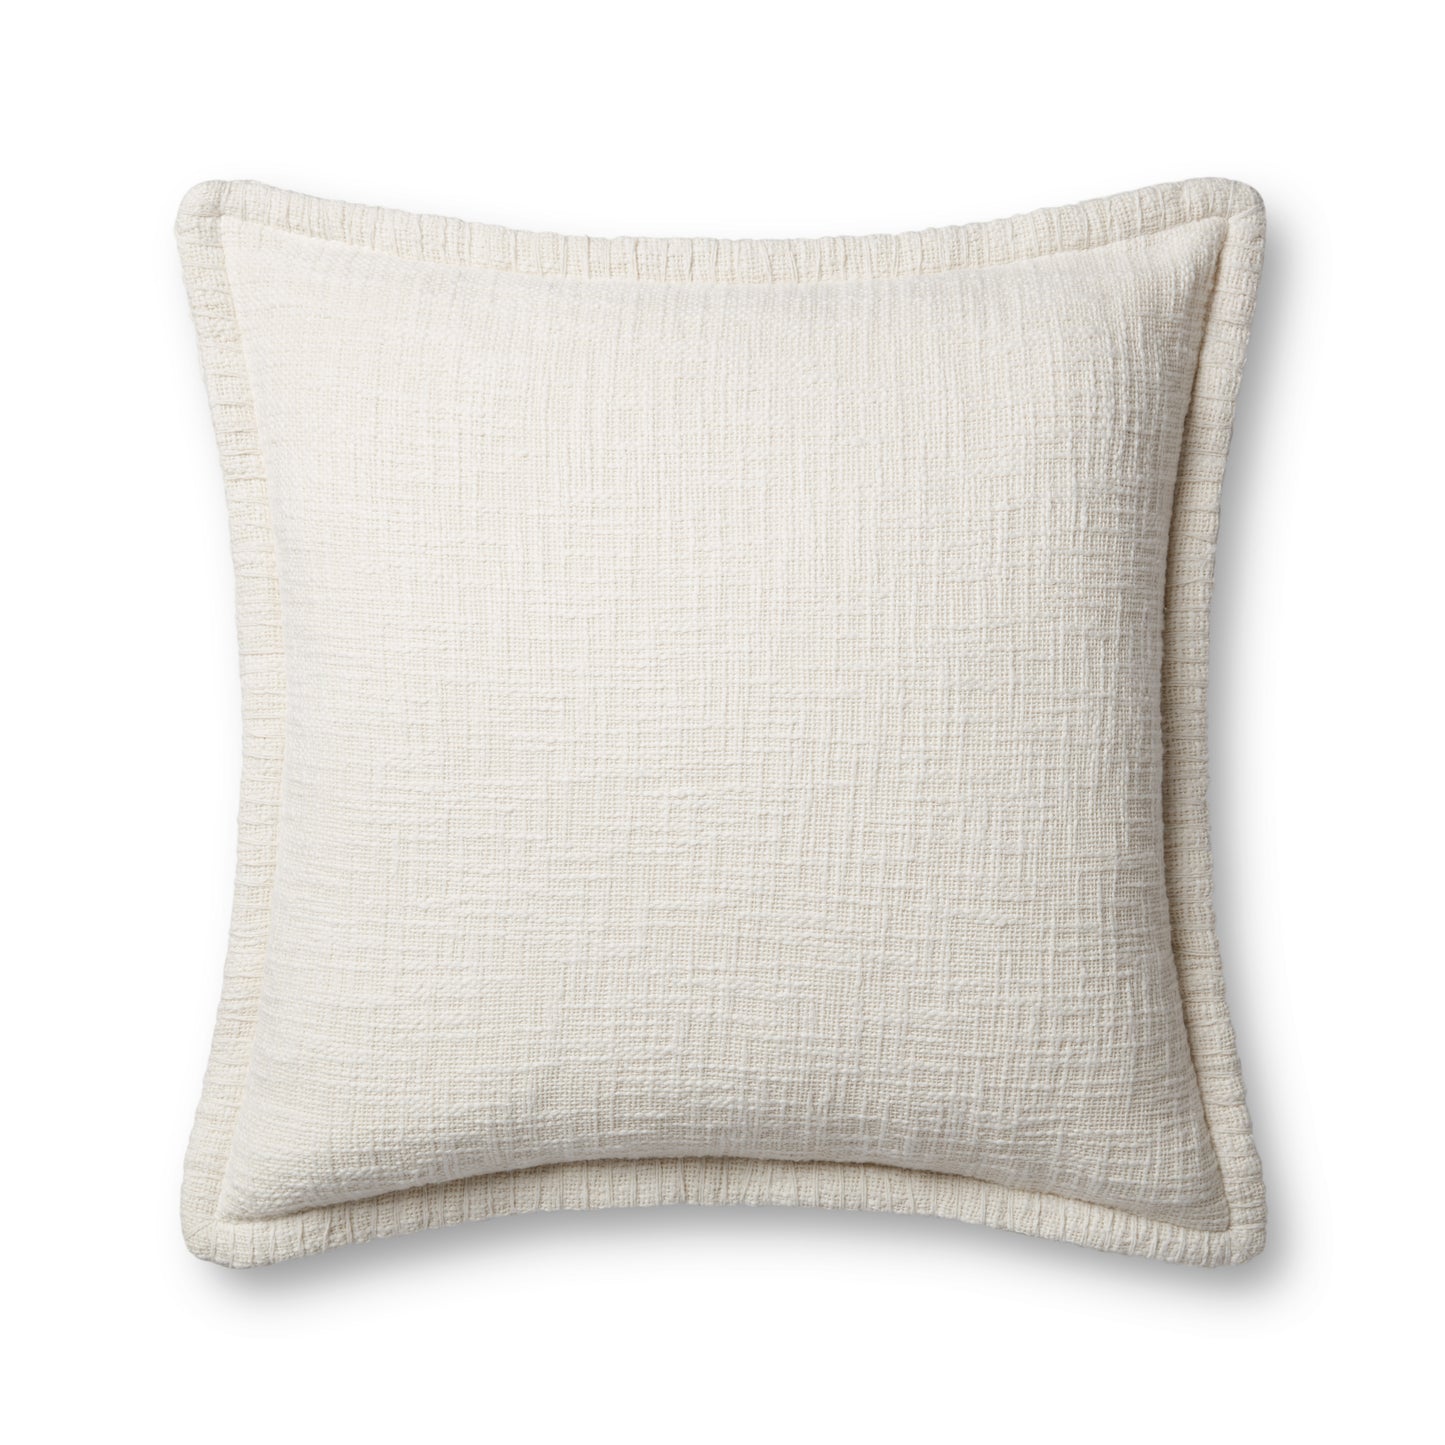 Photo of a pillow;  PLL0109 Ivory 22'' x 22'' Cover w/Poly Pillow